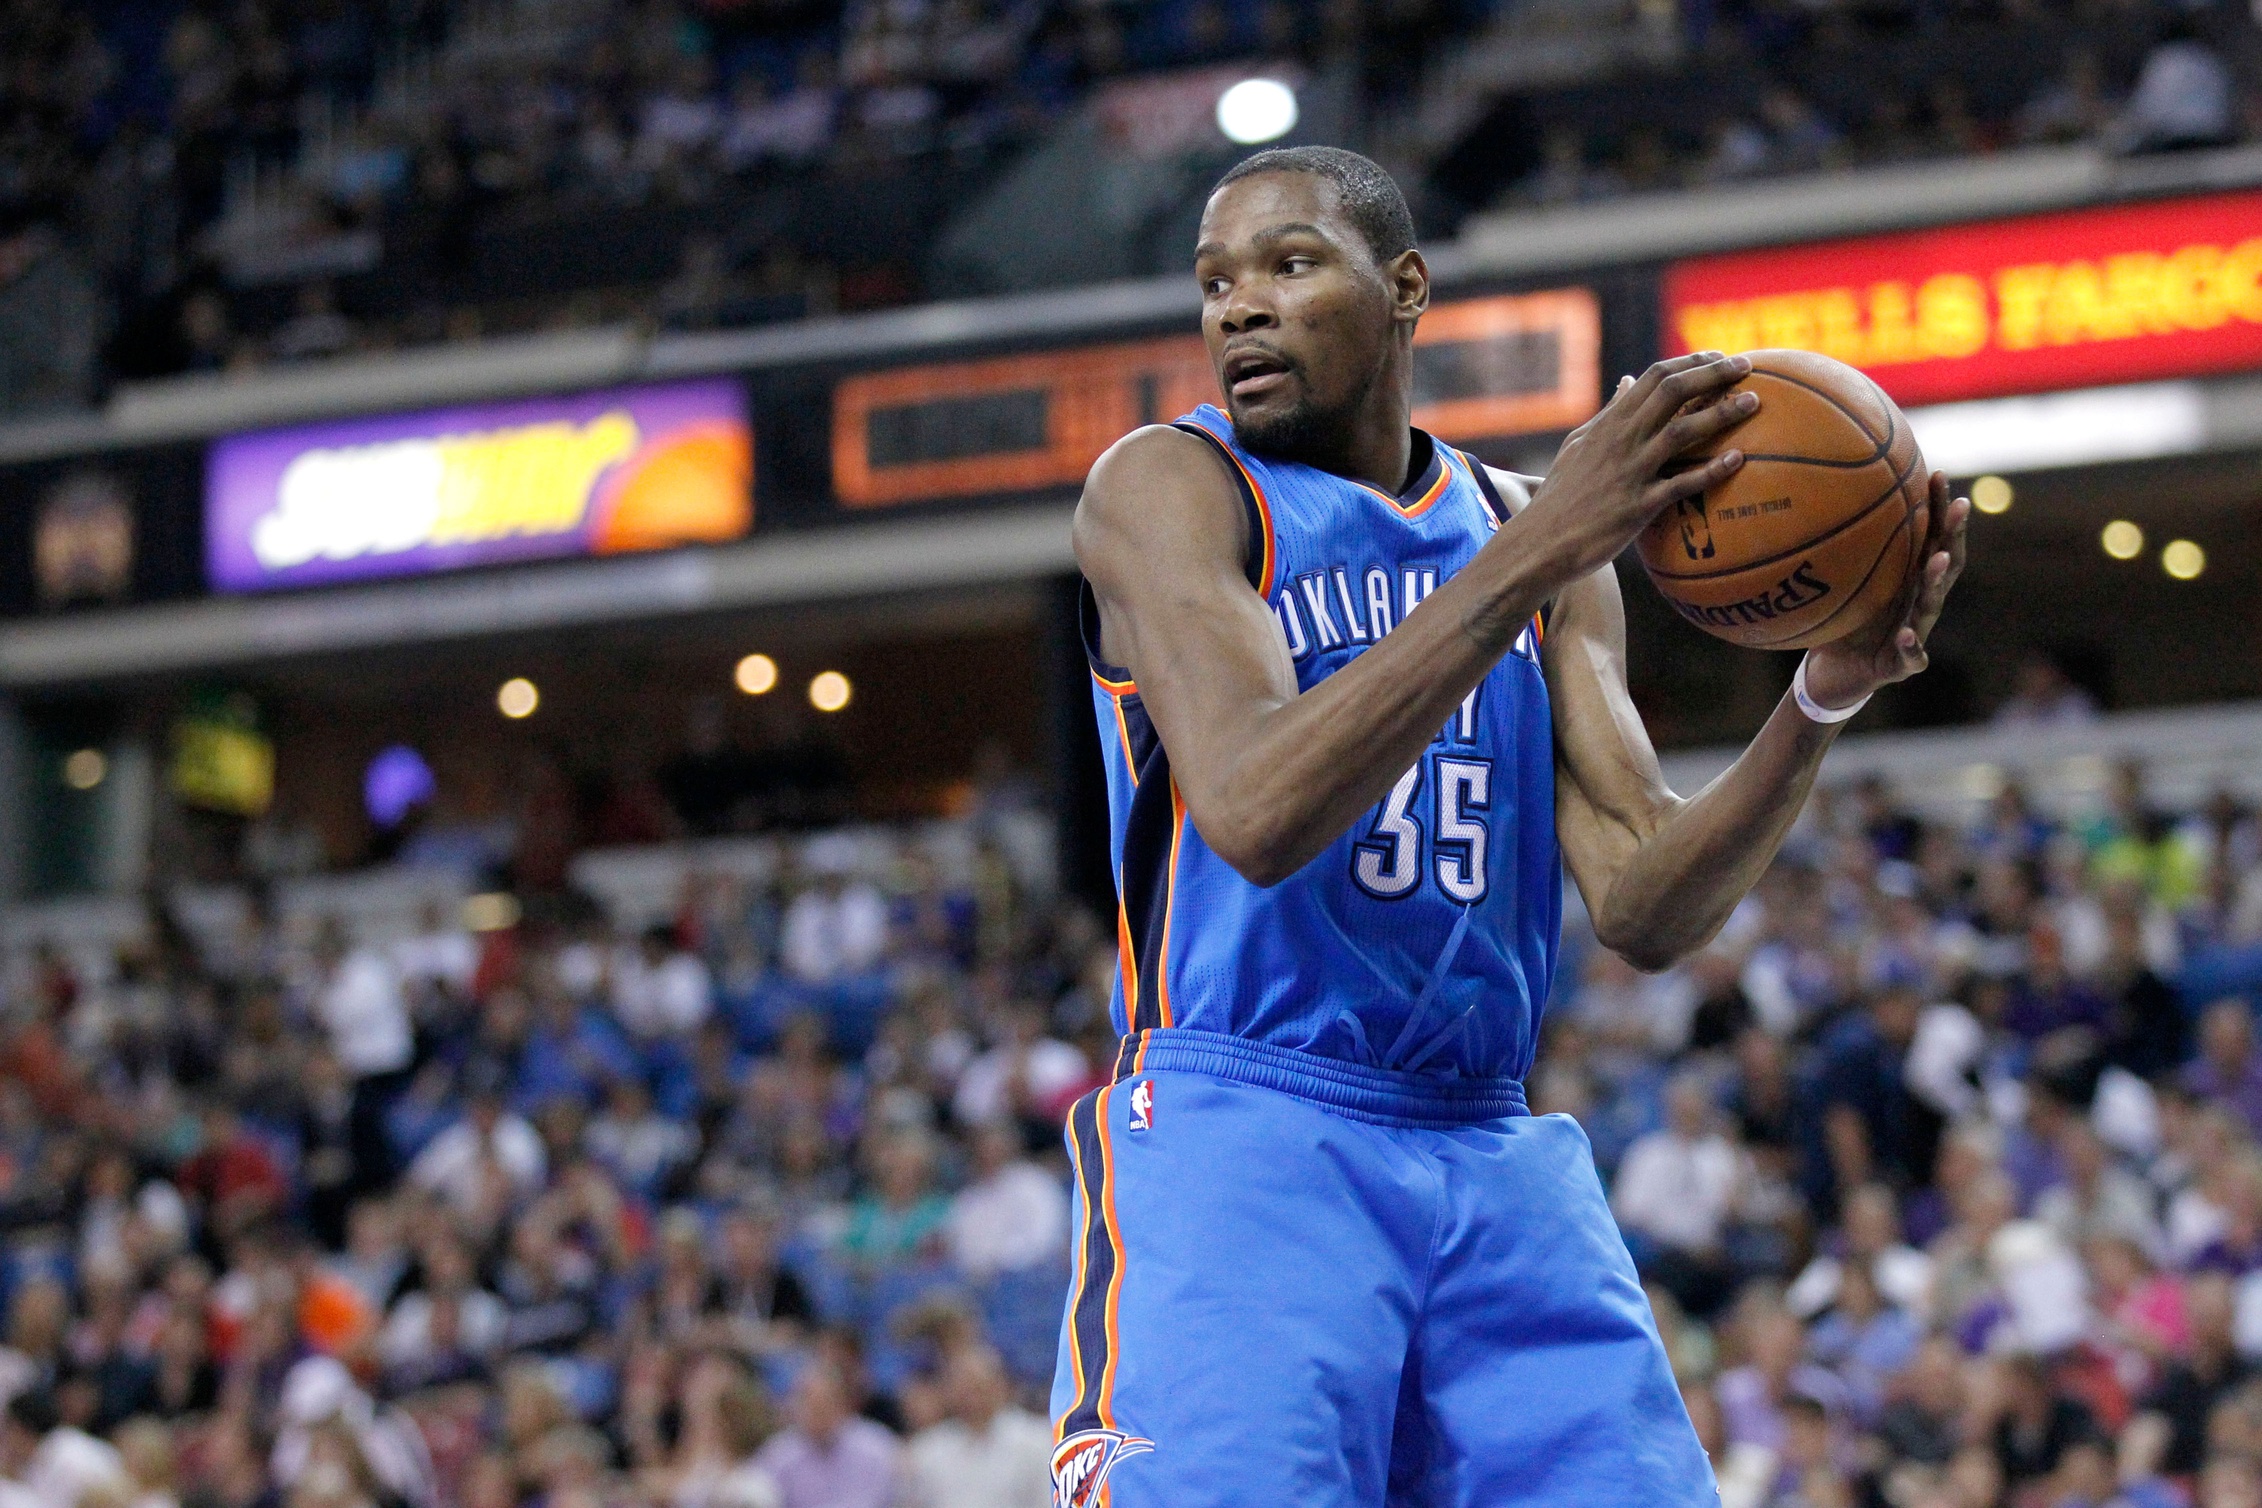 Can Durant make it back to the All-NBA Team? Photo by Cary Edmondson, USA Today Sports Images